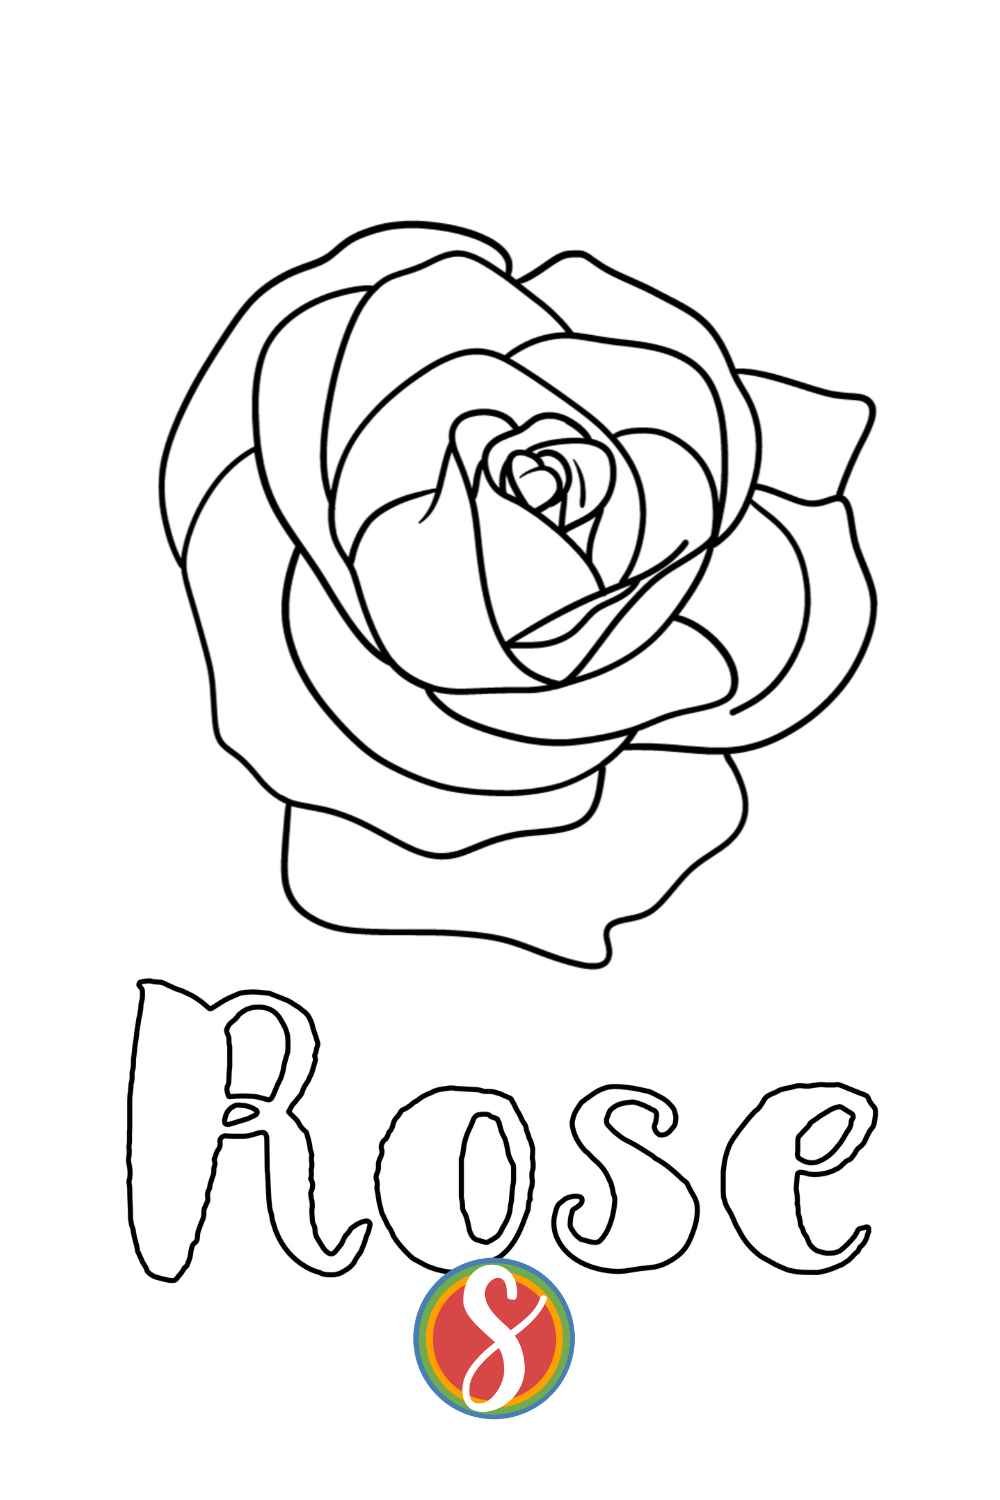 colorable text "rose" under an image of a rose